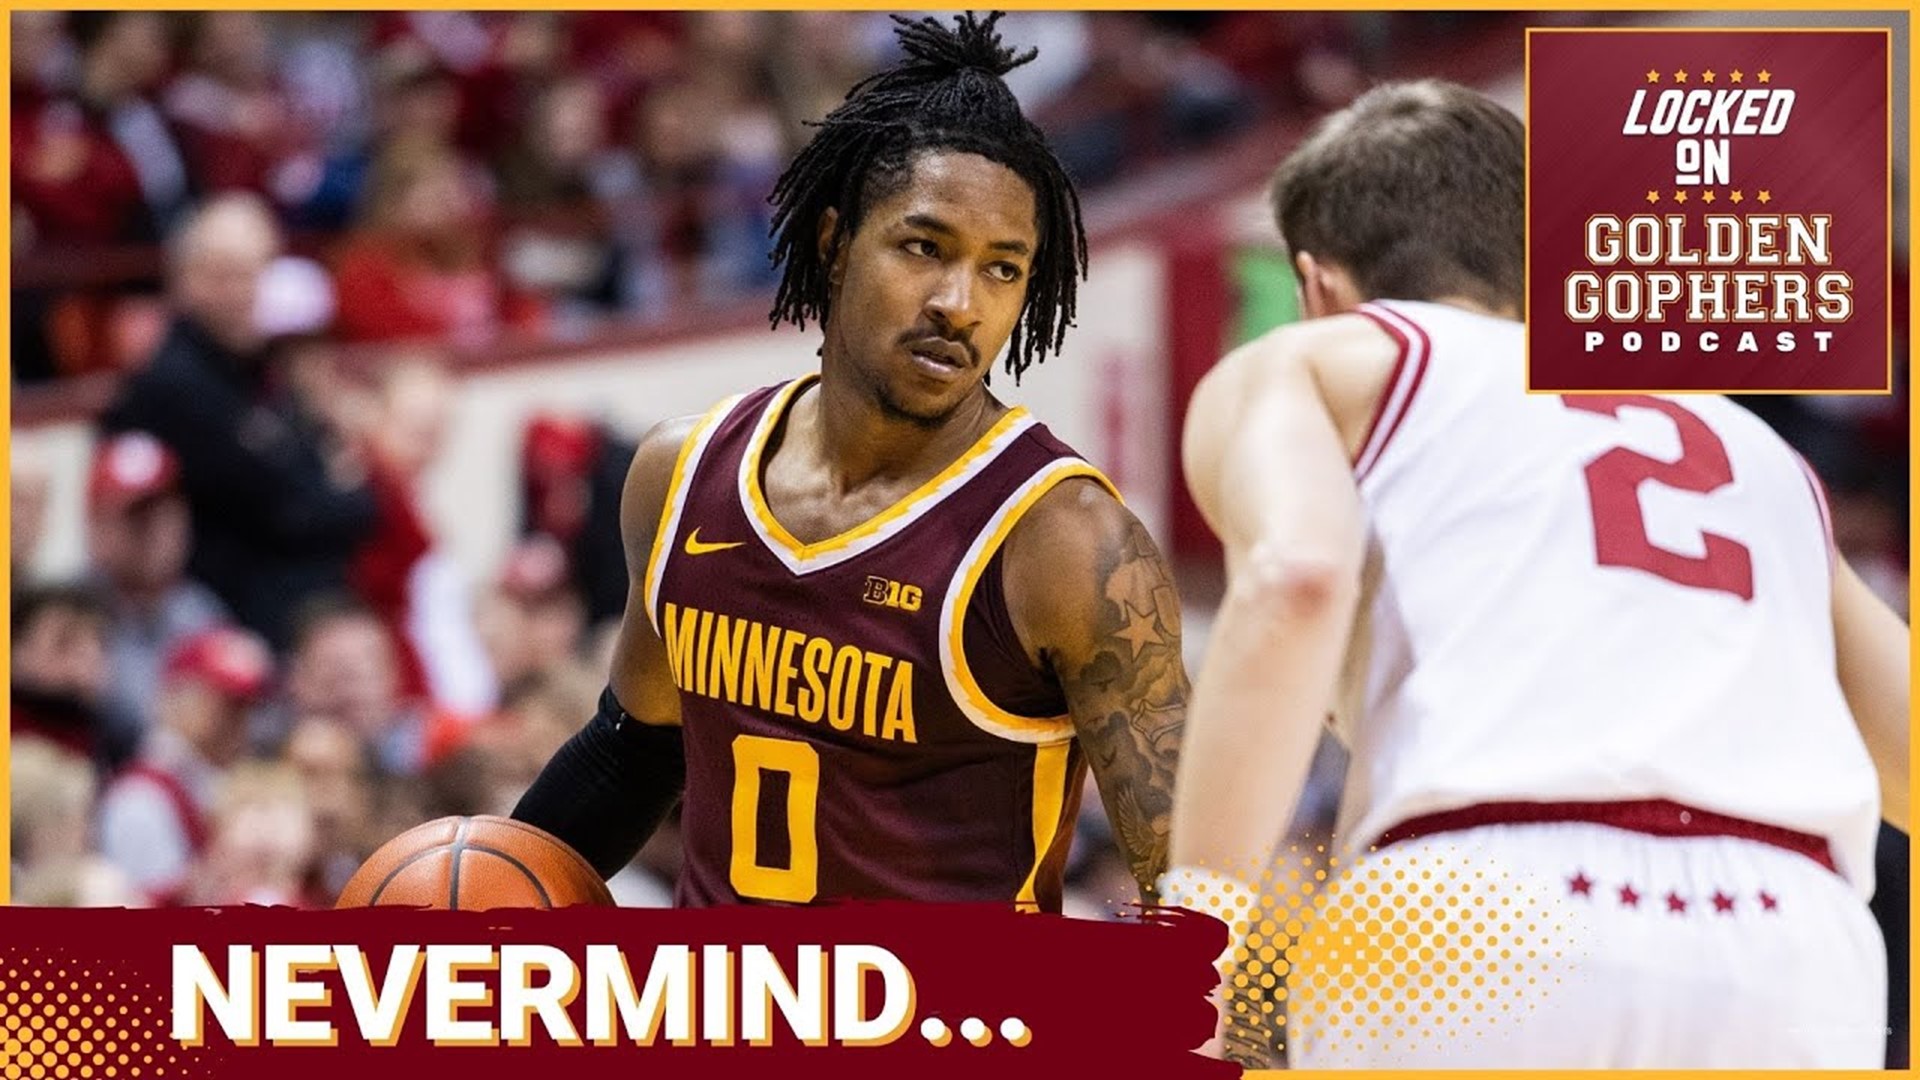 On today's Locked On Golden Gophers, host Kane Rob, discusses how the Minnesota Gophers were burned by Elijah Hawkins entering the transfer portal.